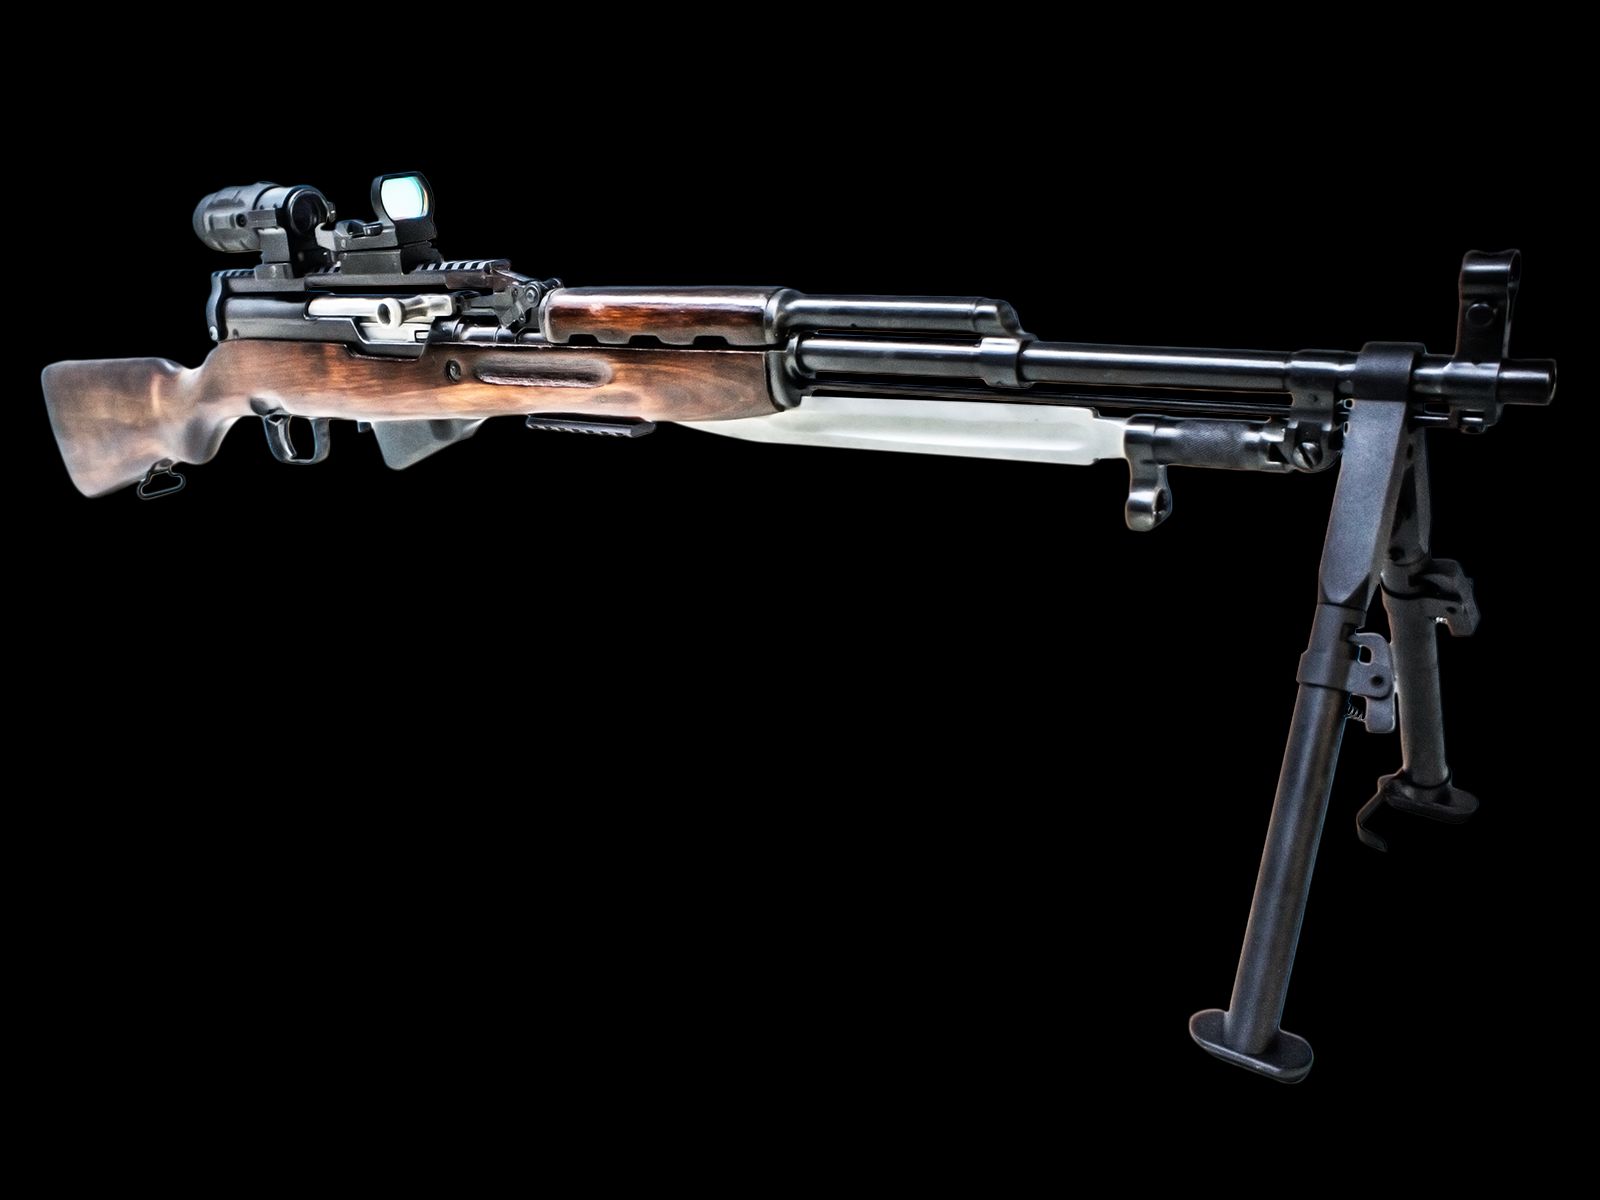 sks rifle, weapons